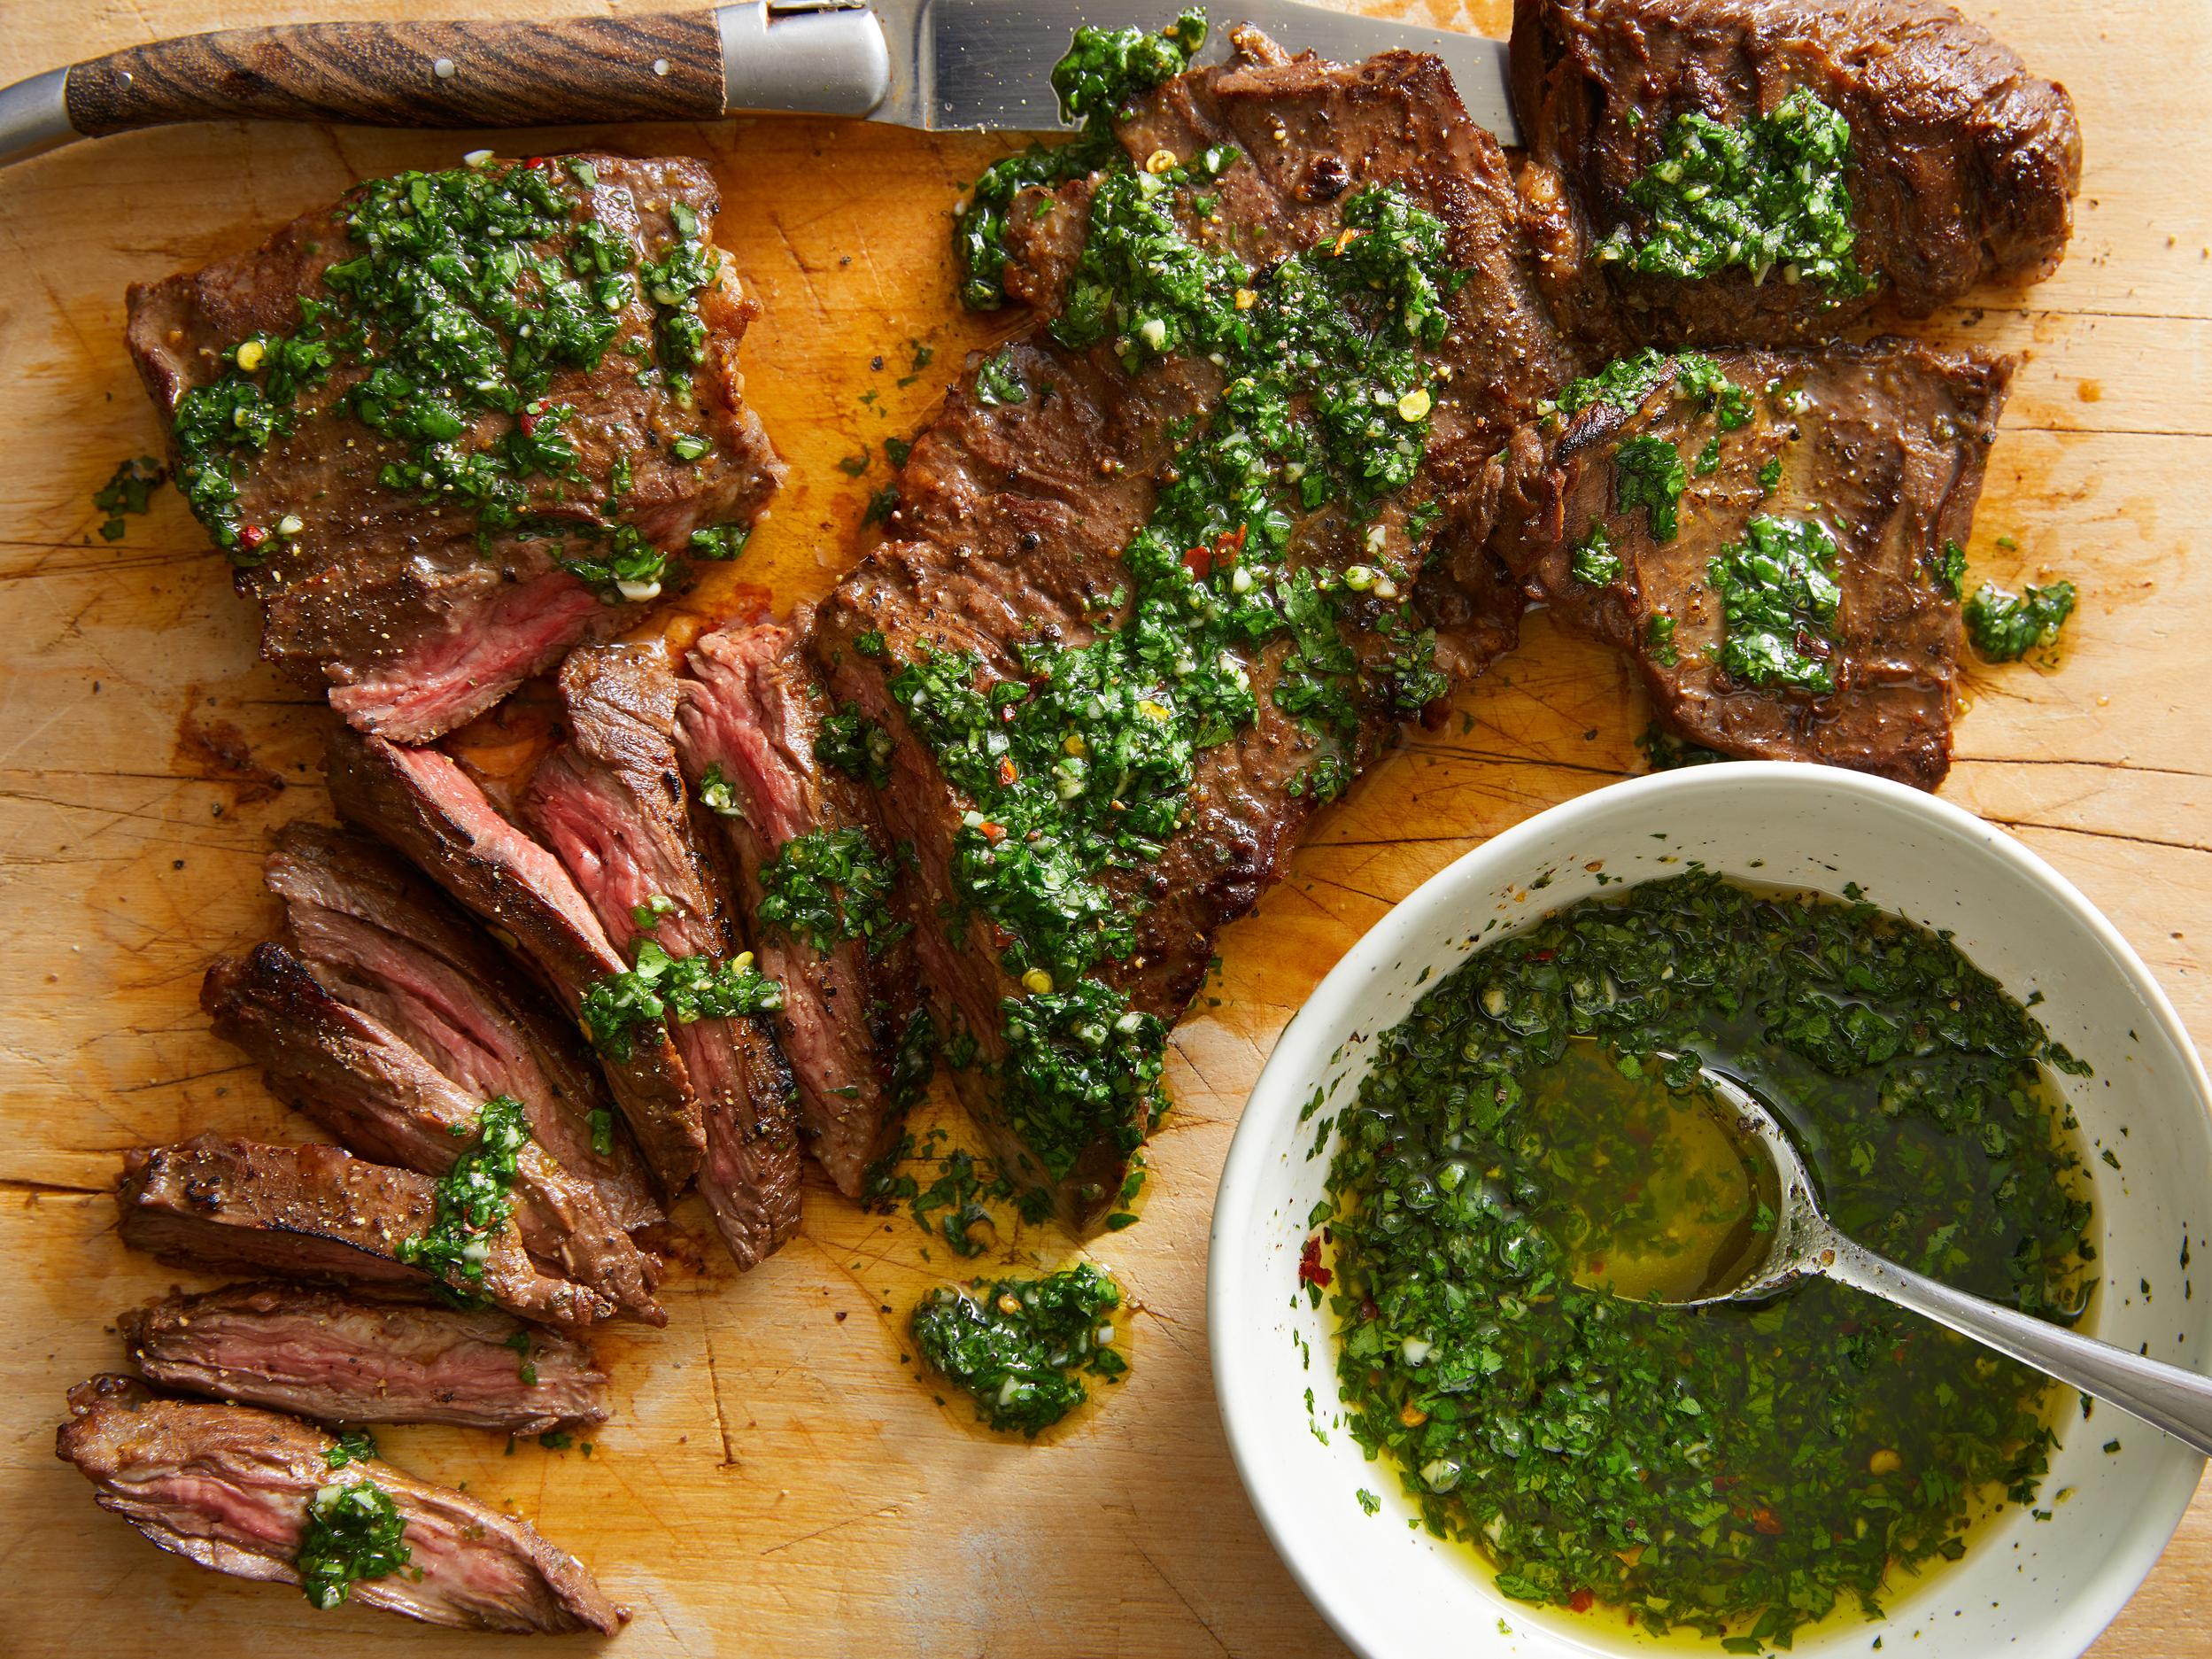  Get ready to grill up some flavor with this delicious churrasco recipe!